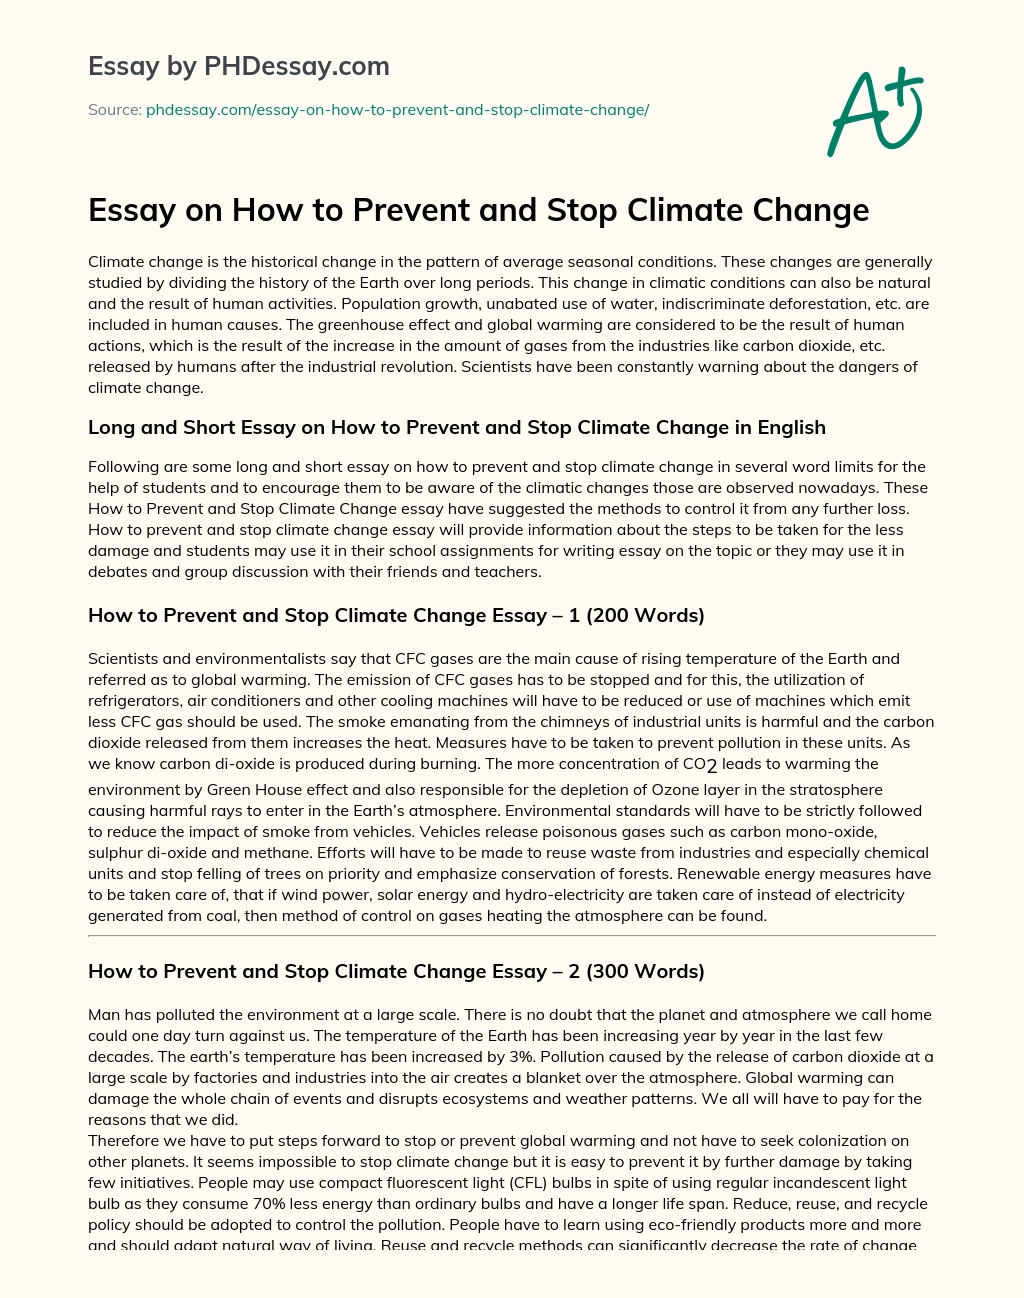 Essay on How to Prevent and Stop Climate Change essay